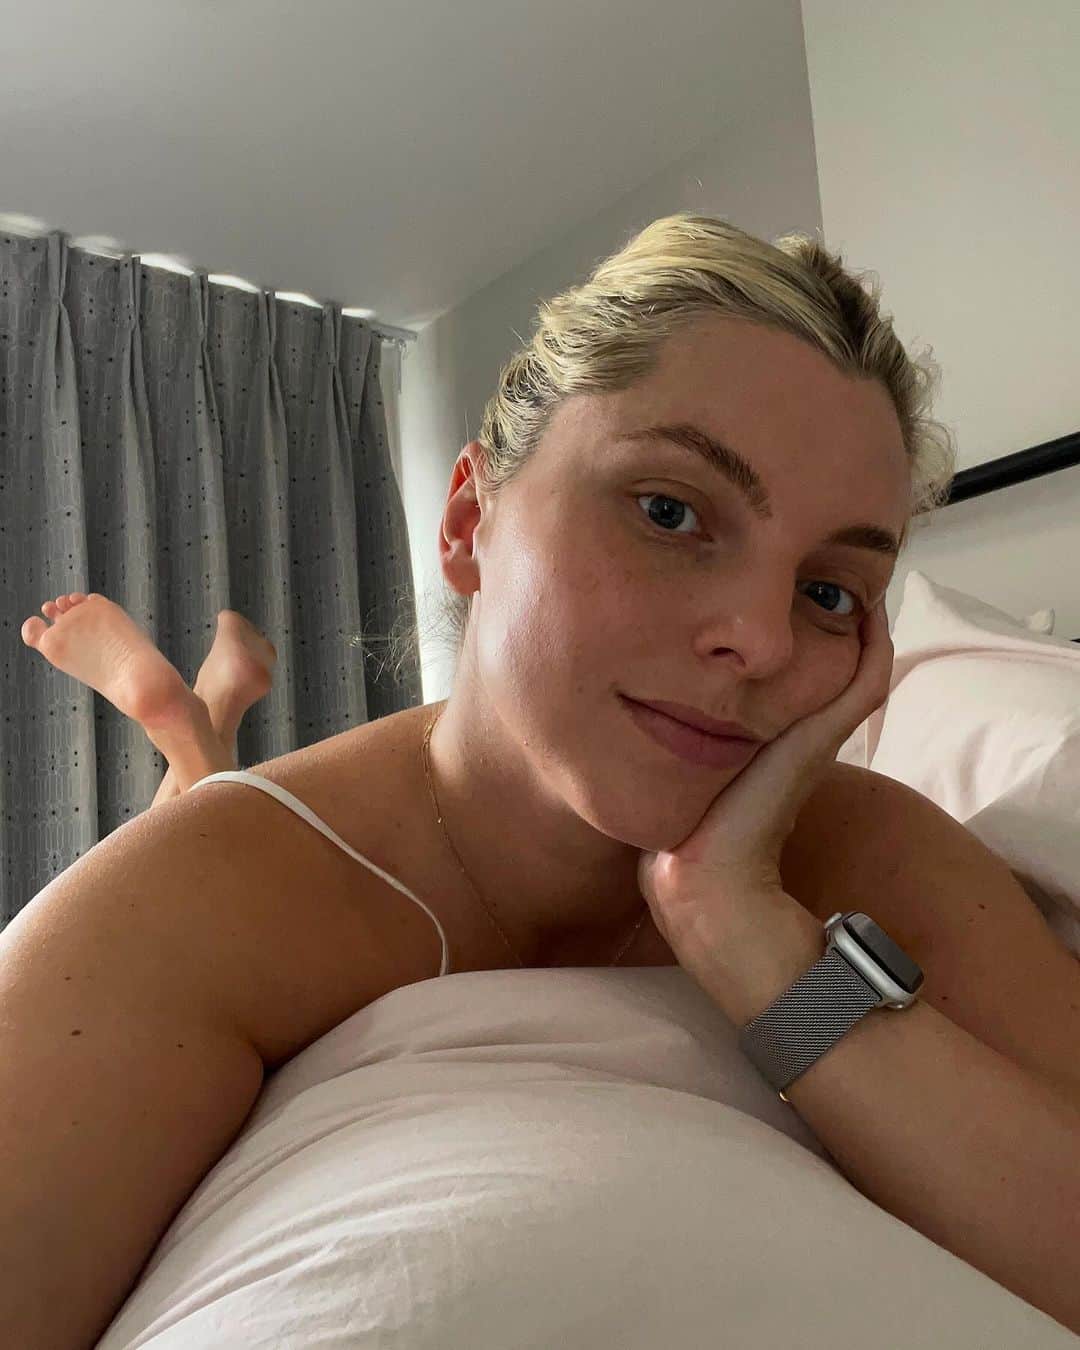 Estée Lalondeのインスタグラム：「I’ve been using the @naturalcycles birth control app in the background for a while now and I was so excited to learn that it now integrates with Apple Watch – it’s one less thing I have to do in the morning (the watch syncs my temperature data automatically!)  We’re all different, but I’ve loved my experience with cycle tracking since coming off the pill a few years ago. If you'd like to read up on NC° or give it a try, go to Naturalcycles.app/Estee and use my code ‘ESTEE’ for 20% off your annual subscription. AD  Natural Cycles is for 18+ and does not protect against STIs.」